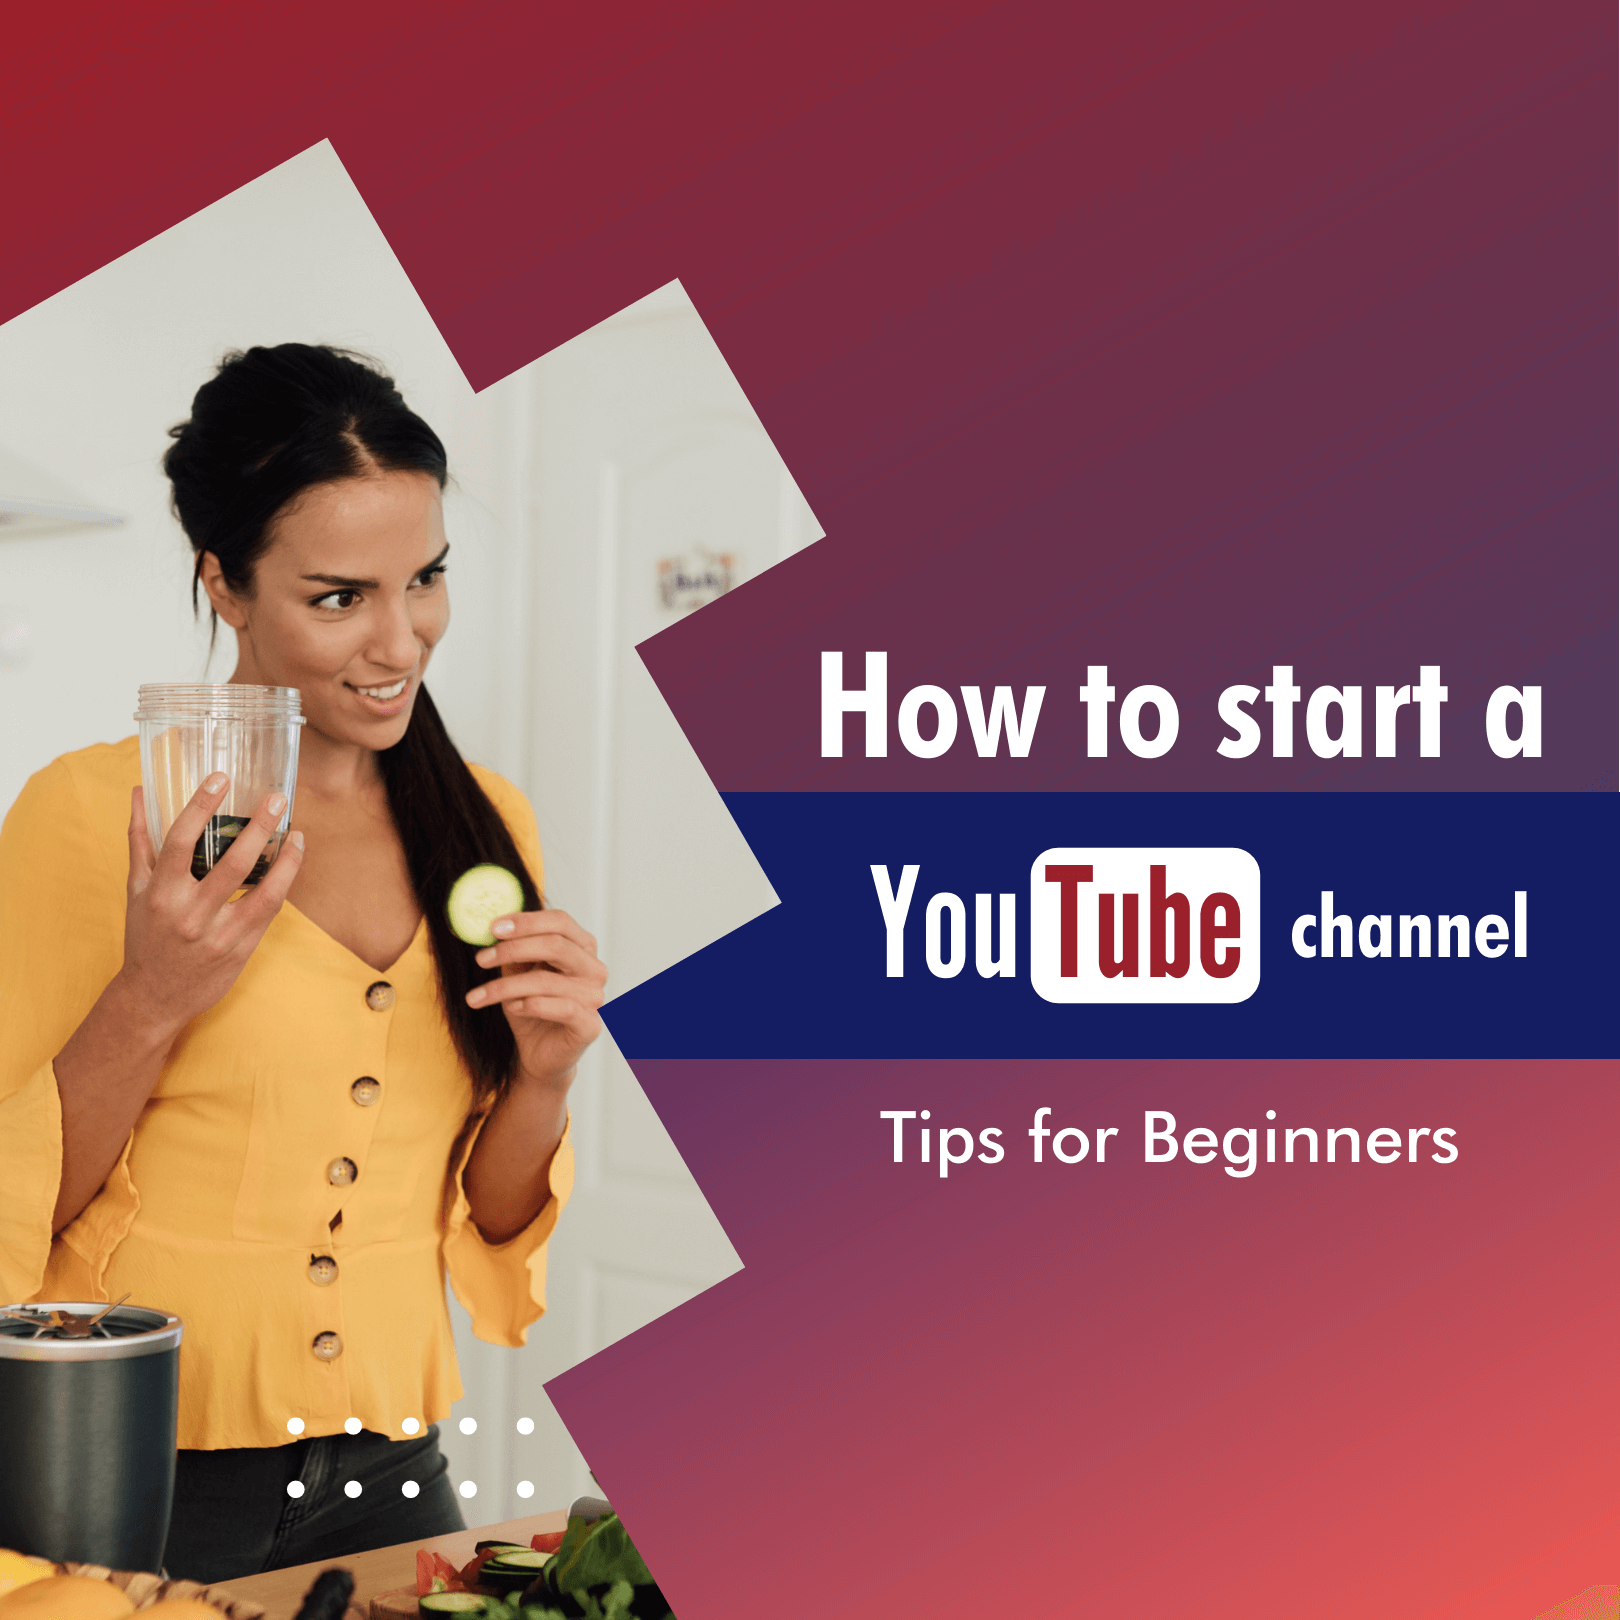 How to Start a YouTube Channel: Tips for Beginners